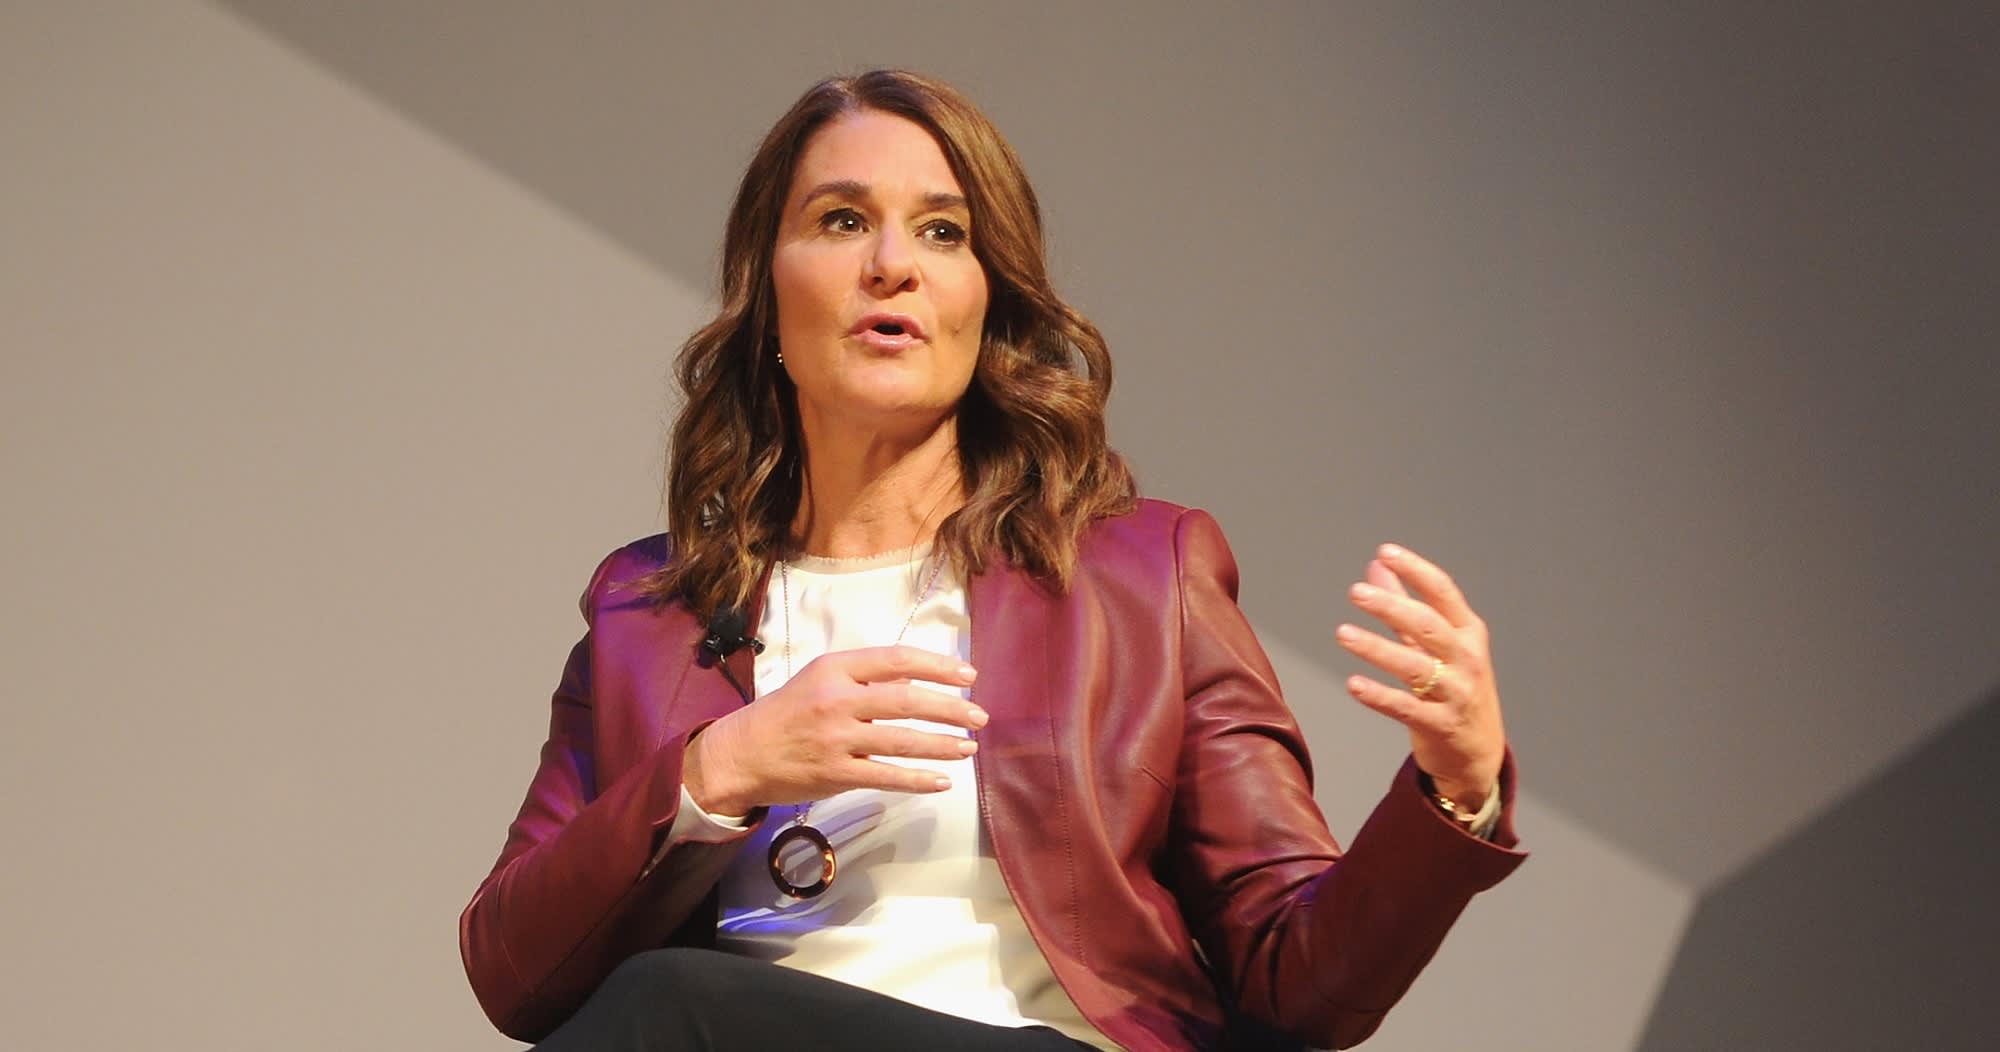 Melinda Gates urges Congress to approve paid sick leave for the family to help the economy